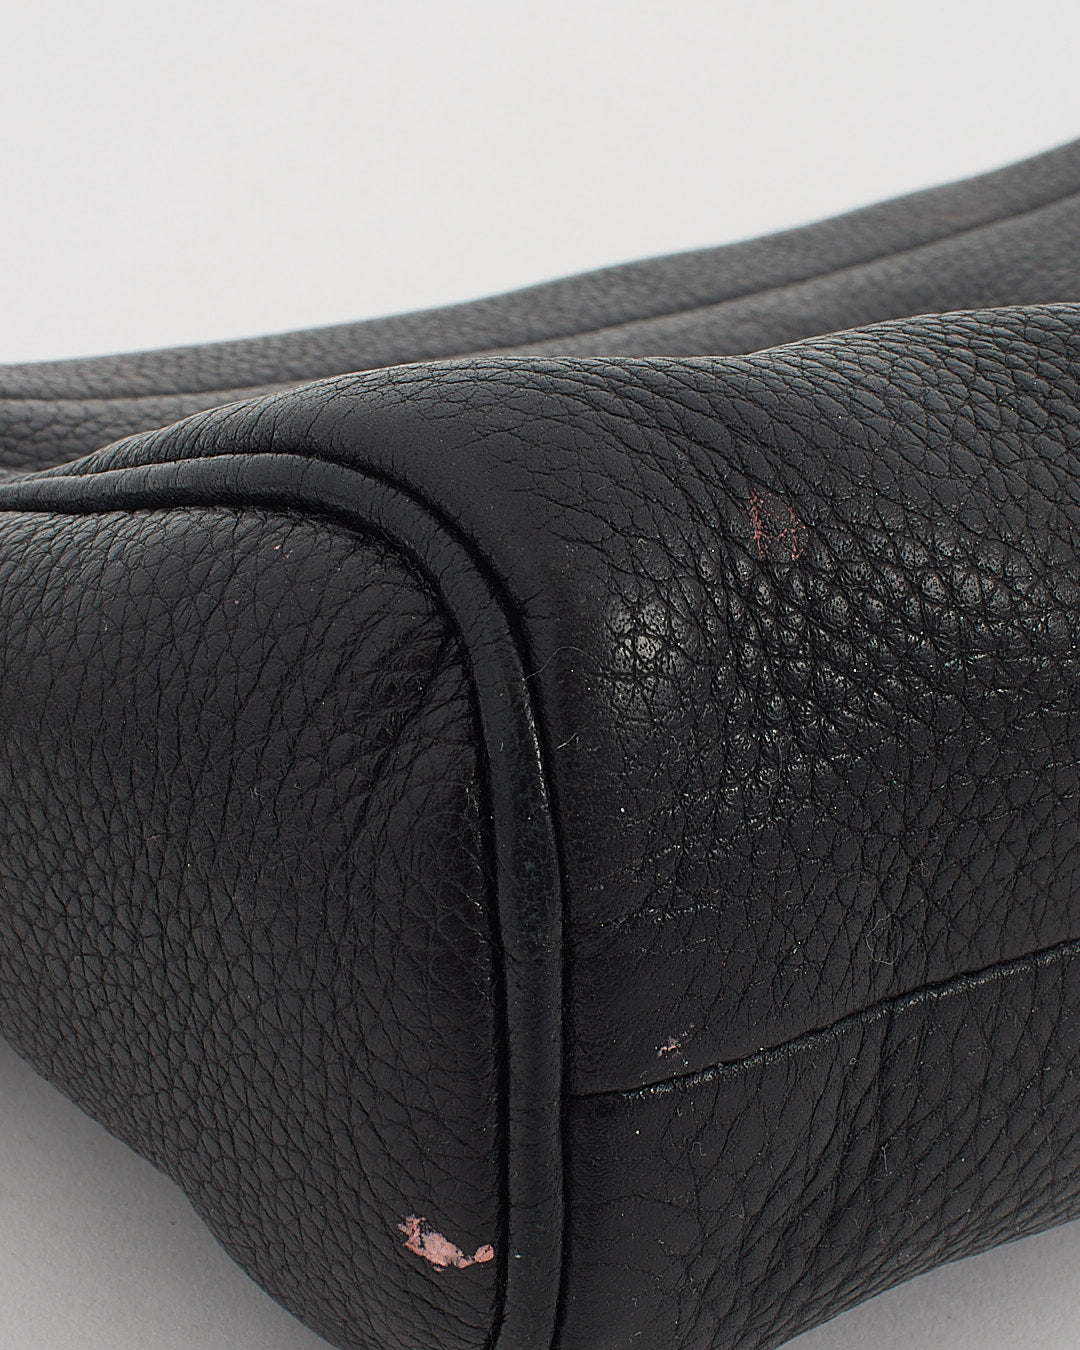 Gucci Black Pebbled Leather Soho Cosmetic Pouch